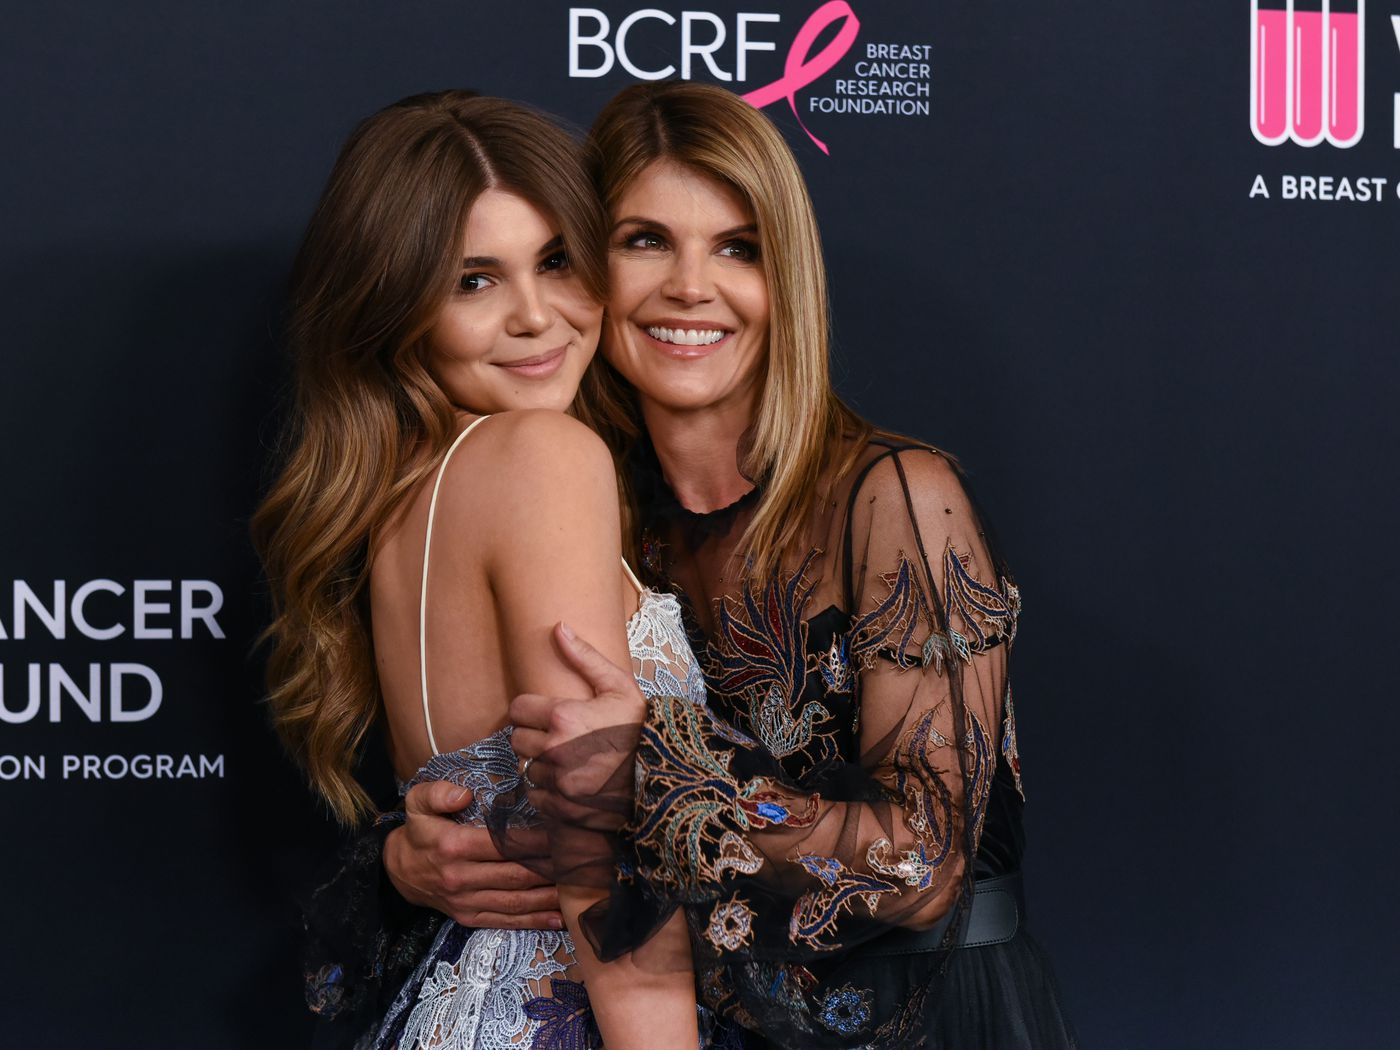 Olivia Jade Giannulli Lori Loughlin And The College Admissions